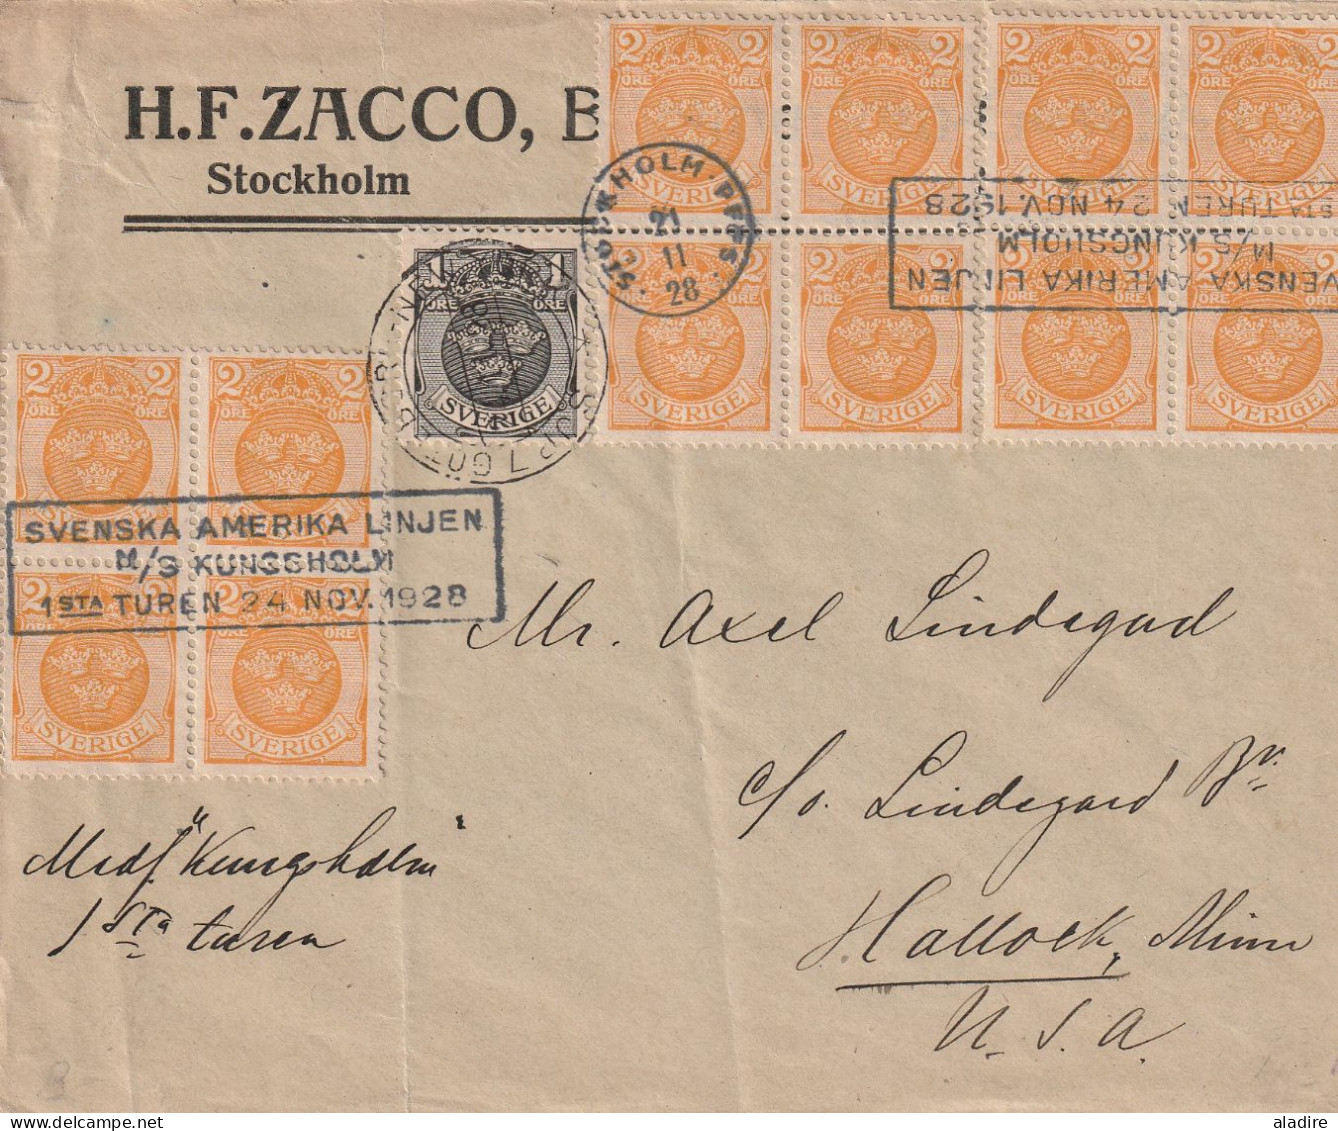 SVERIGE - SWEDEN - Collection of 7 old letters, covers &  card (1842-1952) - 14 scans - € 49 euros